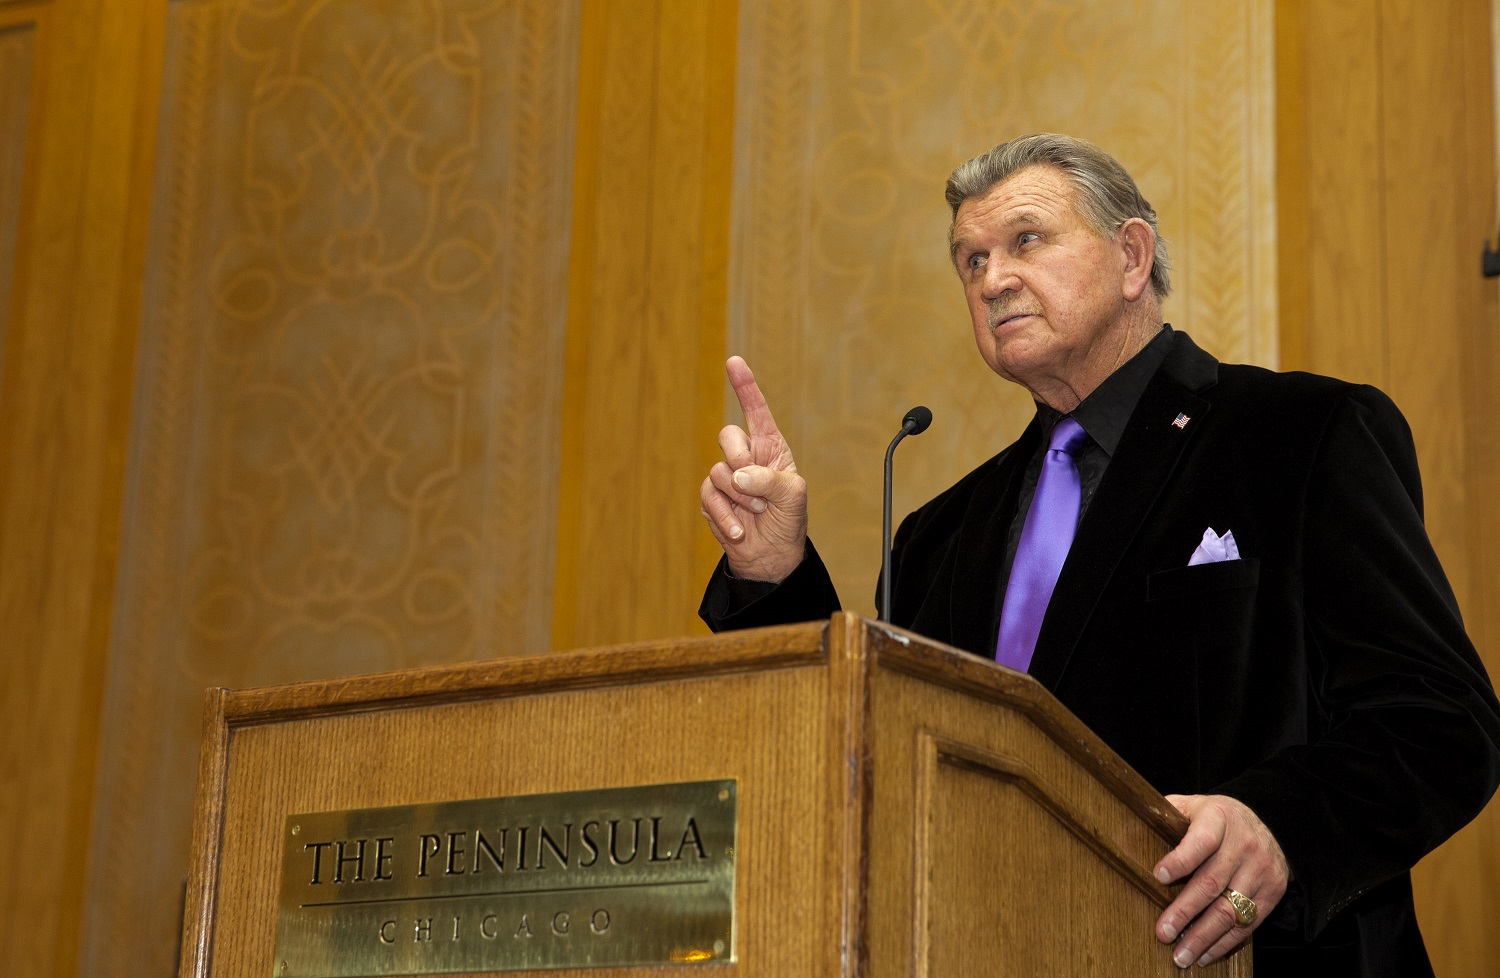 Mike Ditka, who played for and coached the Chicago Bears, doesn't want to see the team move to the suburbs. | Tasos Katopodis/Getty Images for The Christopher & Dana Reeve Foundation